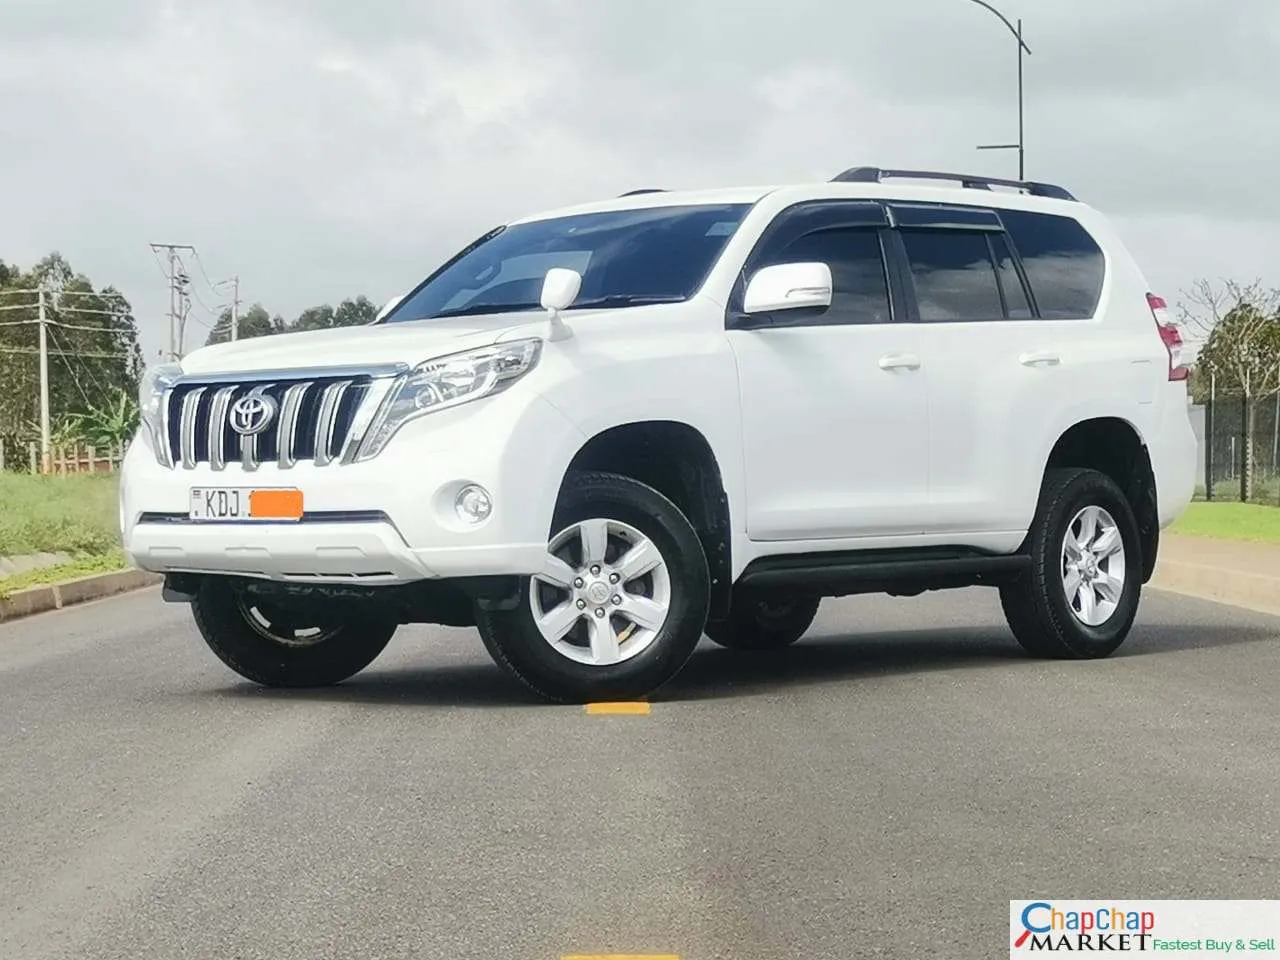 Cars Cars For Sale-Toyota Prado j150 QUICKEST 🔥 You Pay 40% Deposit Trade in OK EXCLUSIVE Toyota Prado for sale in kenya hire purchase installments EXCLUSIVE 9